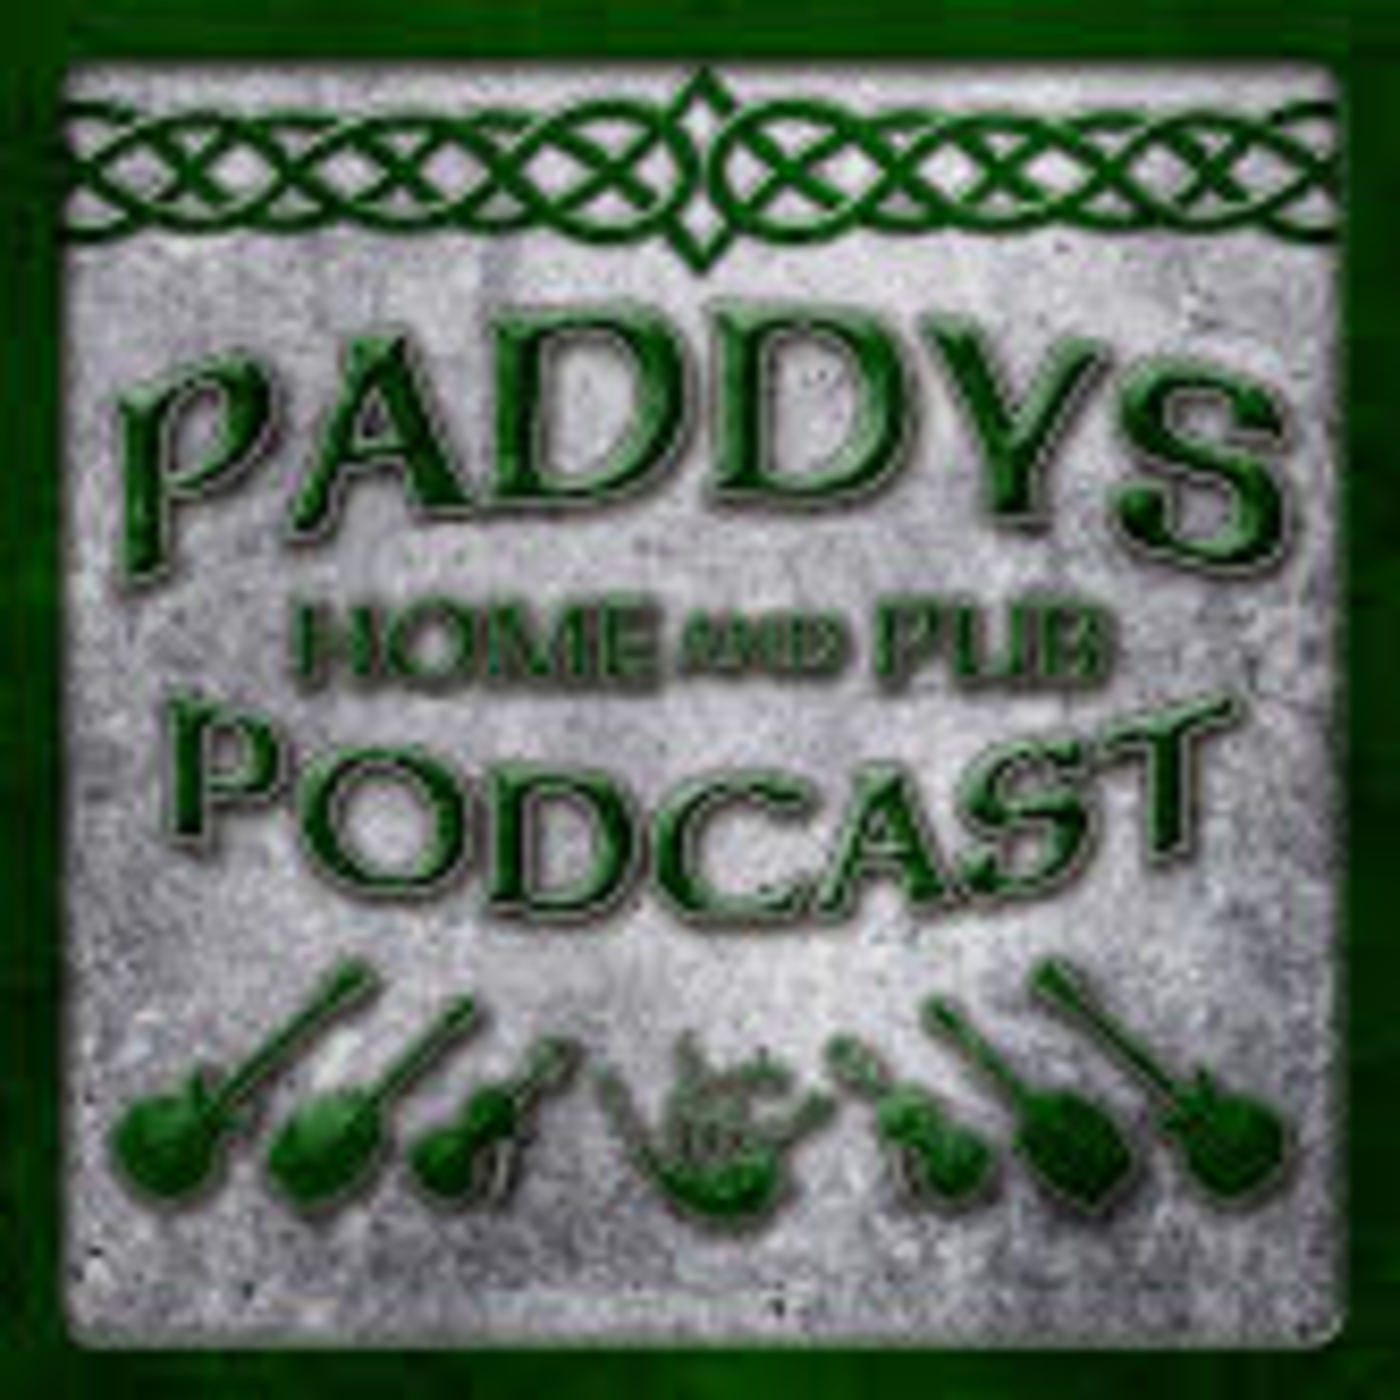 Podcast # 4 After the Great American Irish Fest